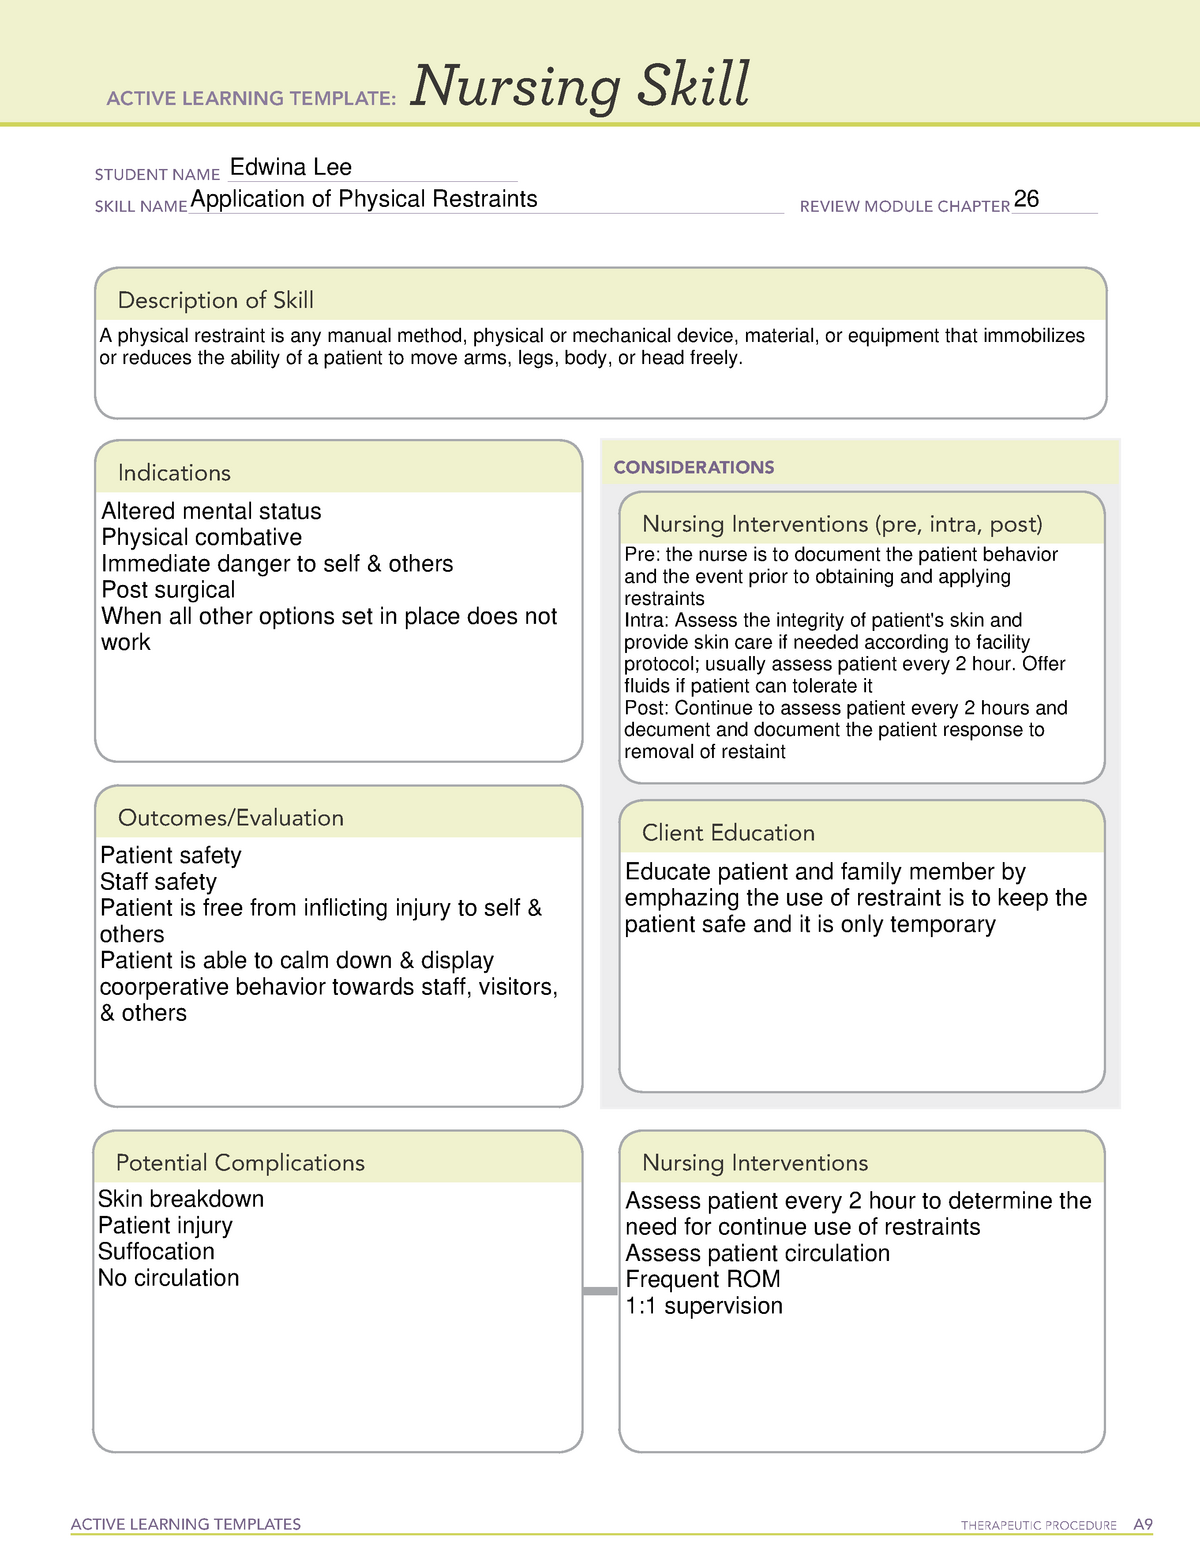 nursing-skill-active-learning-template